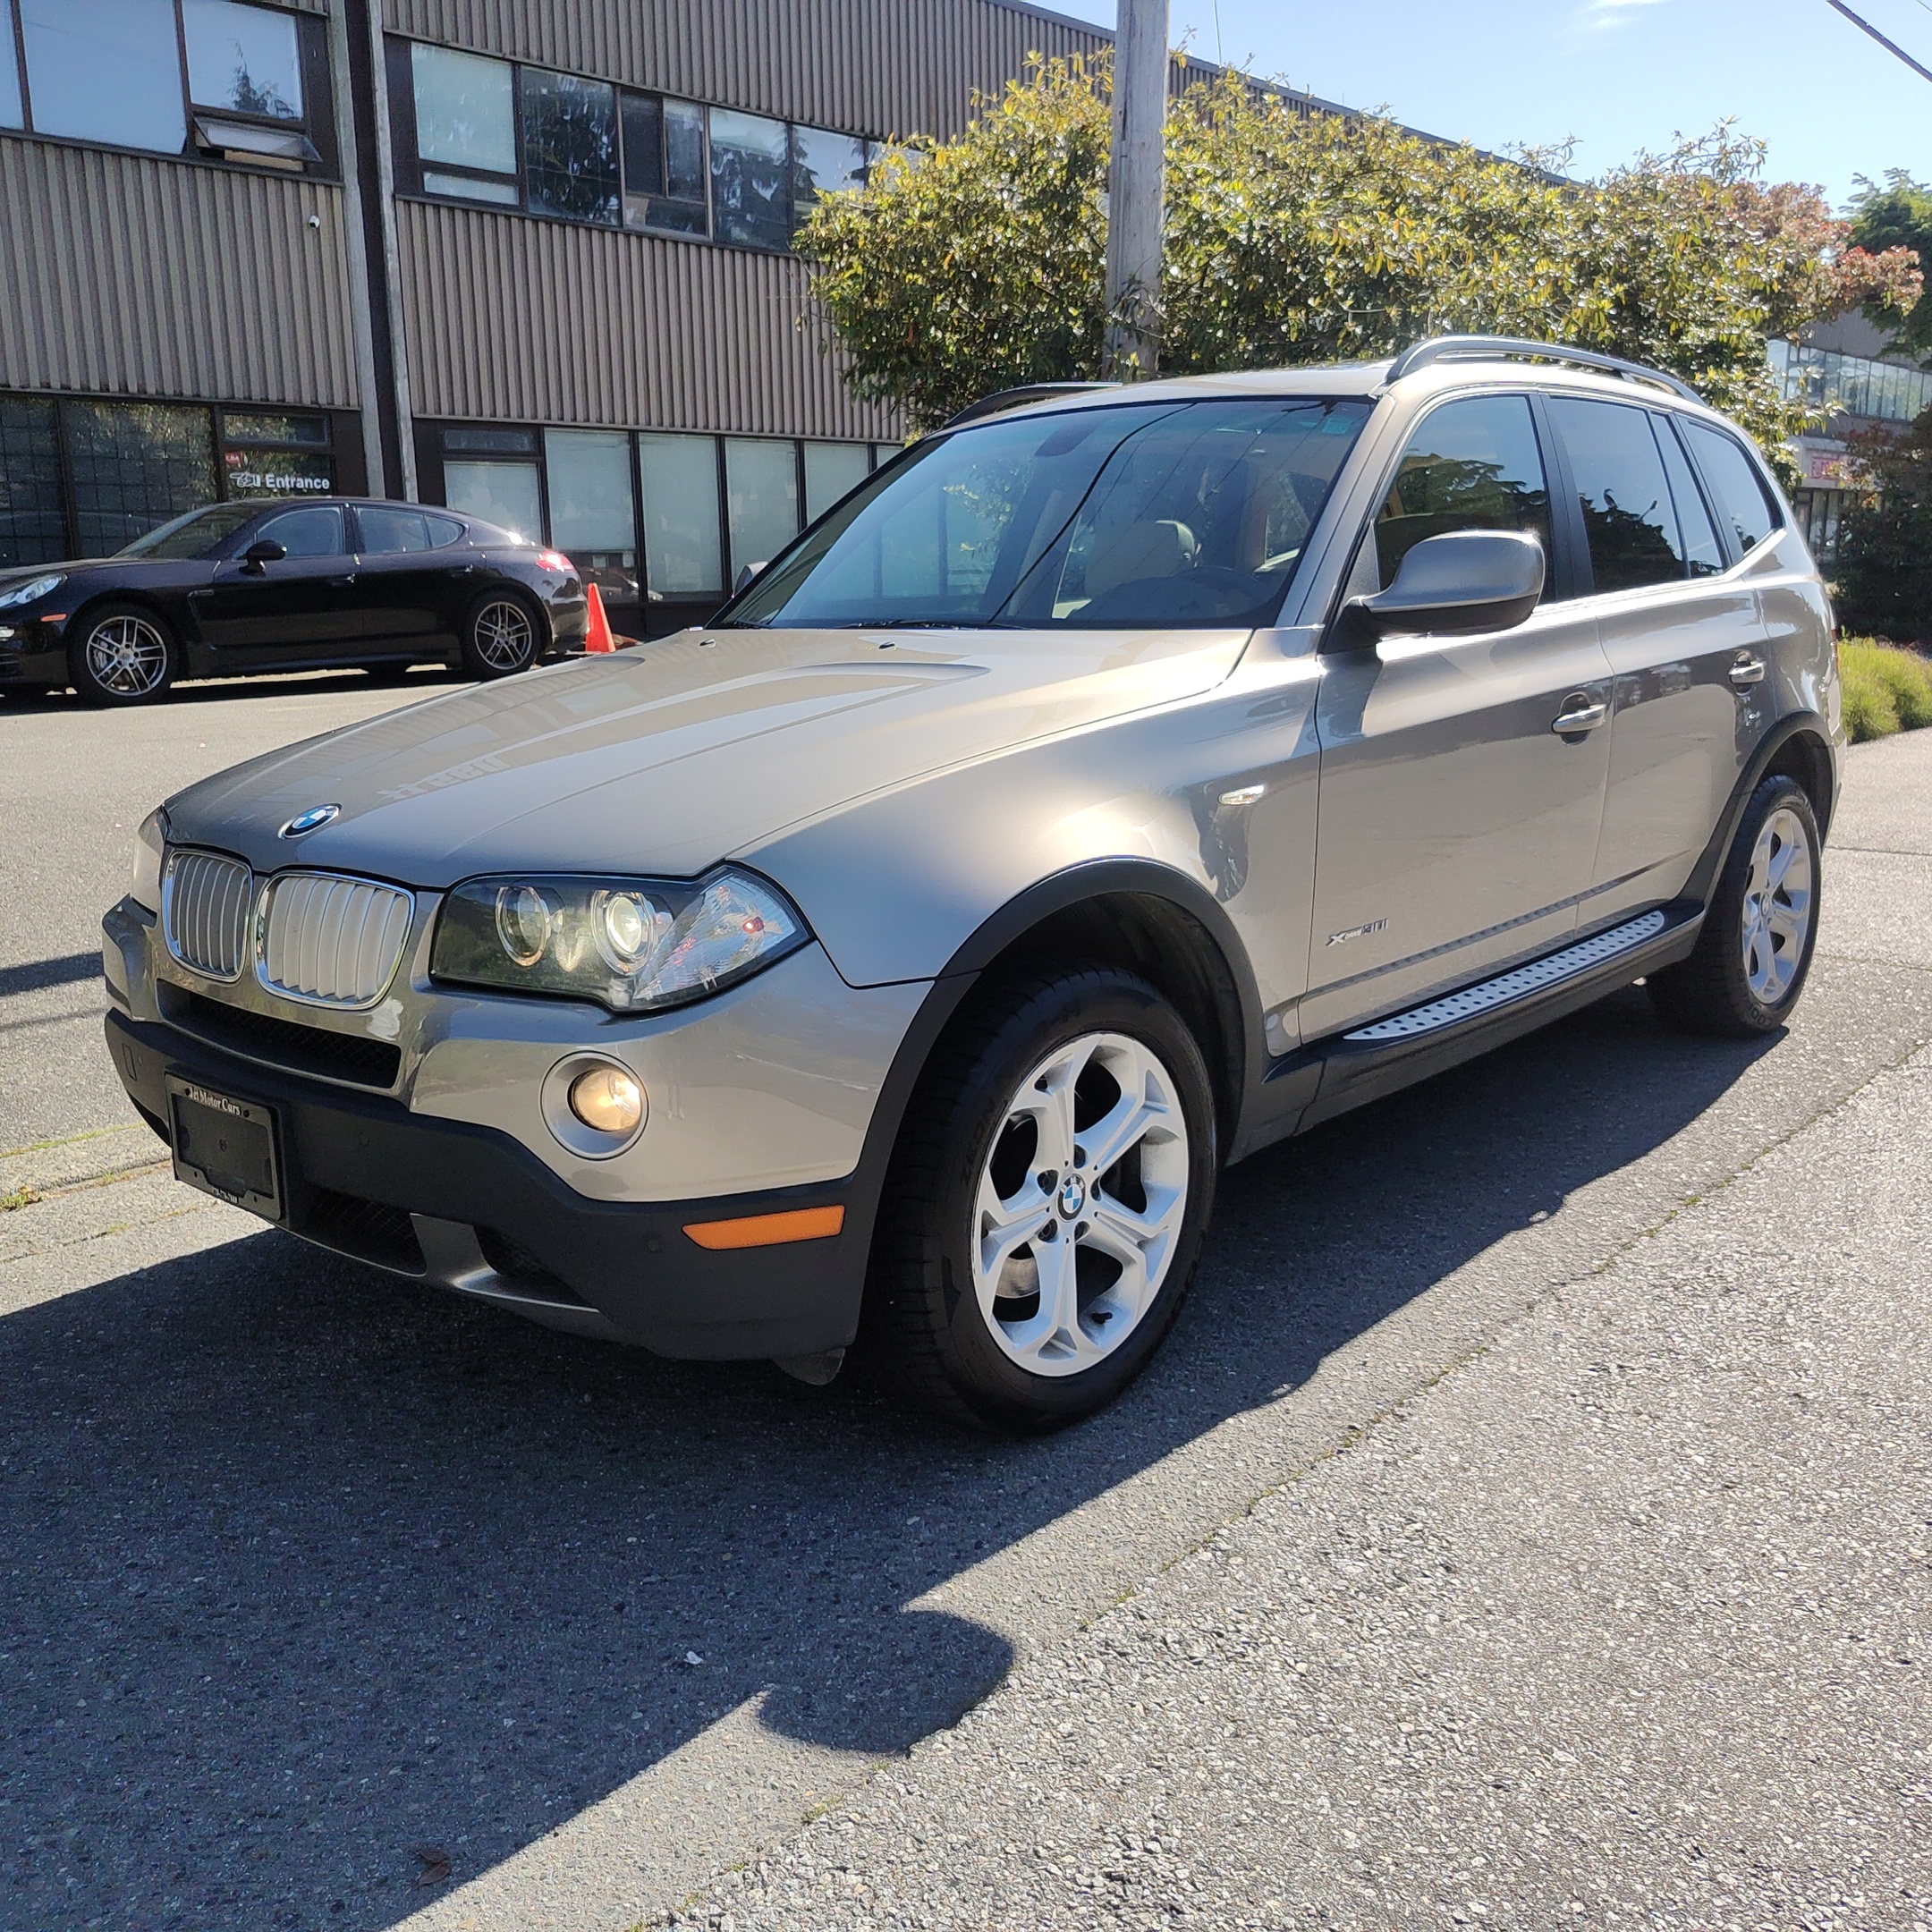 2010 BMW X3 XDRIVE 30i, FULL BMW SERVICED RECORDS, ONE OWNER